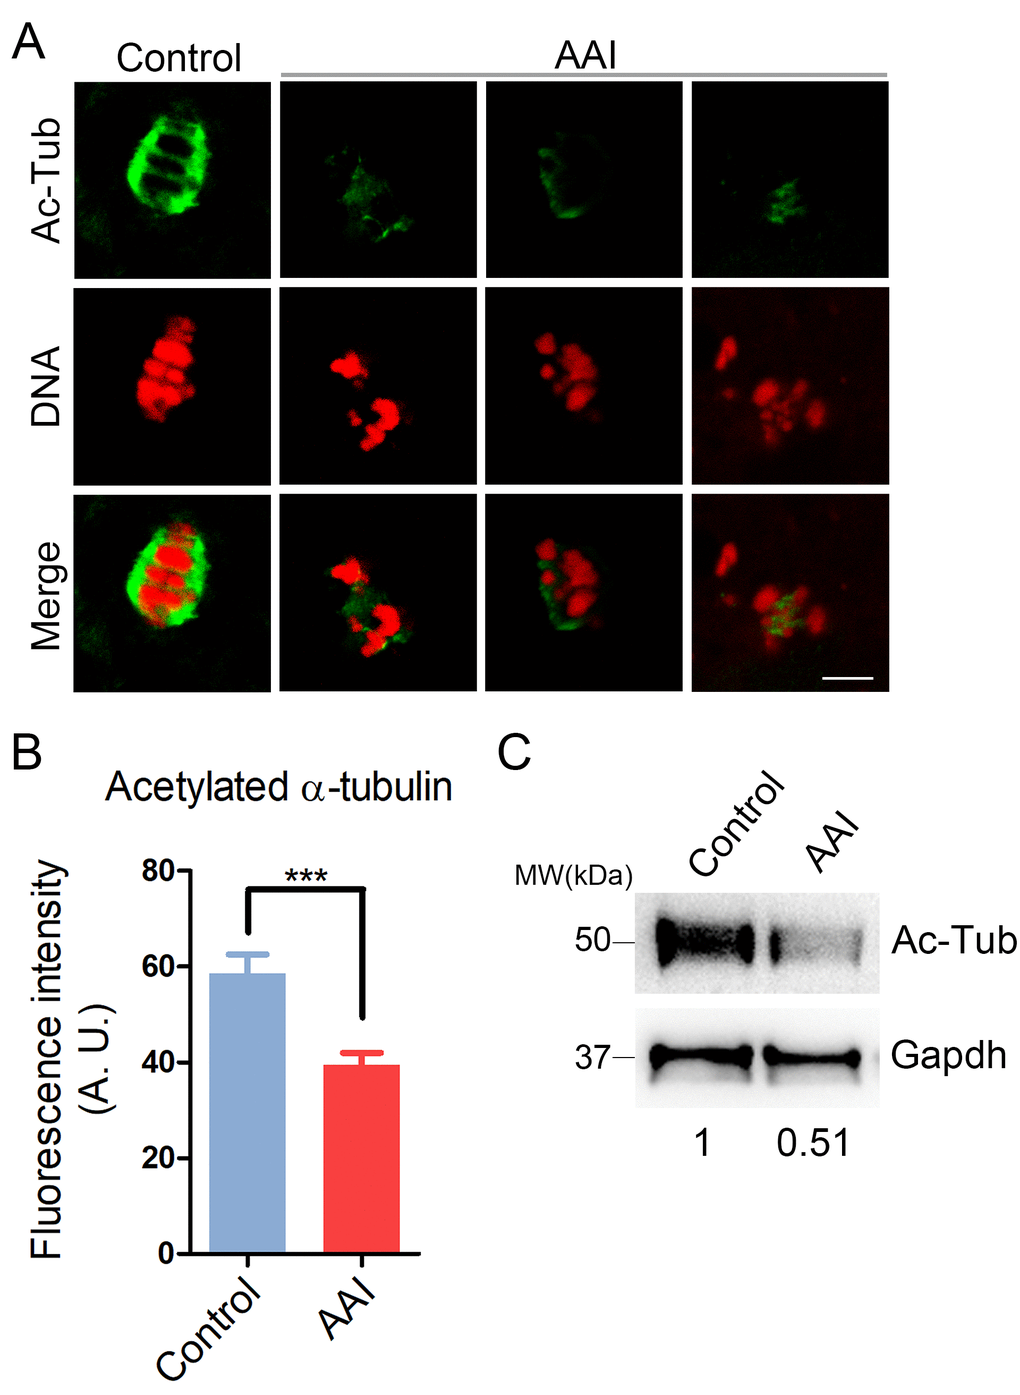 Effects of AAI exposure on the acetylation level of α-tubulin in porcine oocytes. (A) Representative images of acetylated α-tubulin (Ac-Tub) in control and AAI-exposed oocytes. Oocytes were immunostained with anti-acetyl-α-tubulin (Lys-40) antibody to assess the acetylation level of α-tubulin. Scale bar, 10 μm. (B) Quantitative measurement of the fluorescence intensity of acetylated α-tubulin in control and AAI-exposed oocytes. Data were presented as mean percentage (mean ± SEM) of at least three independent experiments. ***P C) The acetylation levels of α-tubulin in control and AAI-exposed oocytes were examined by western blotting. The blots were probed with anti-acetyl-α-tubulin (Lys-40) antibody and anti-Gapdh antibody, respectively.